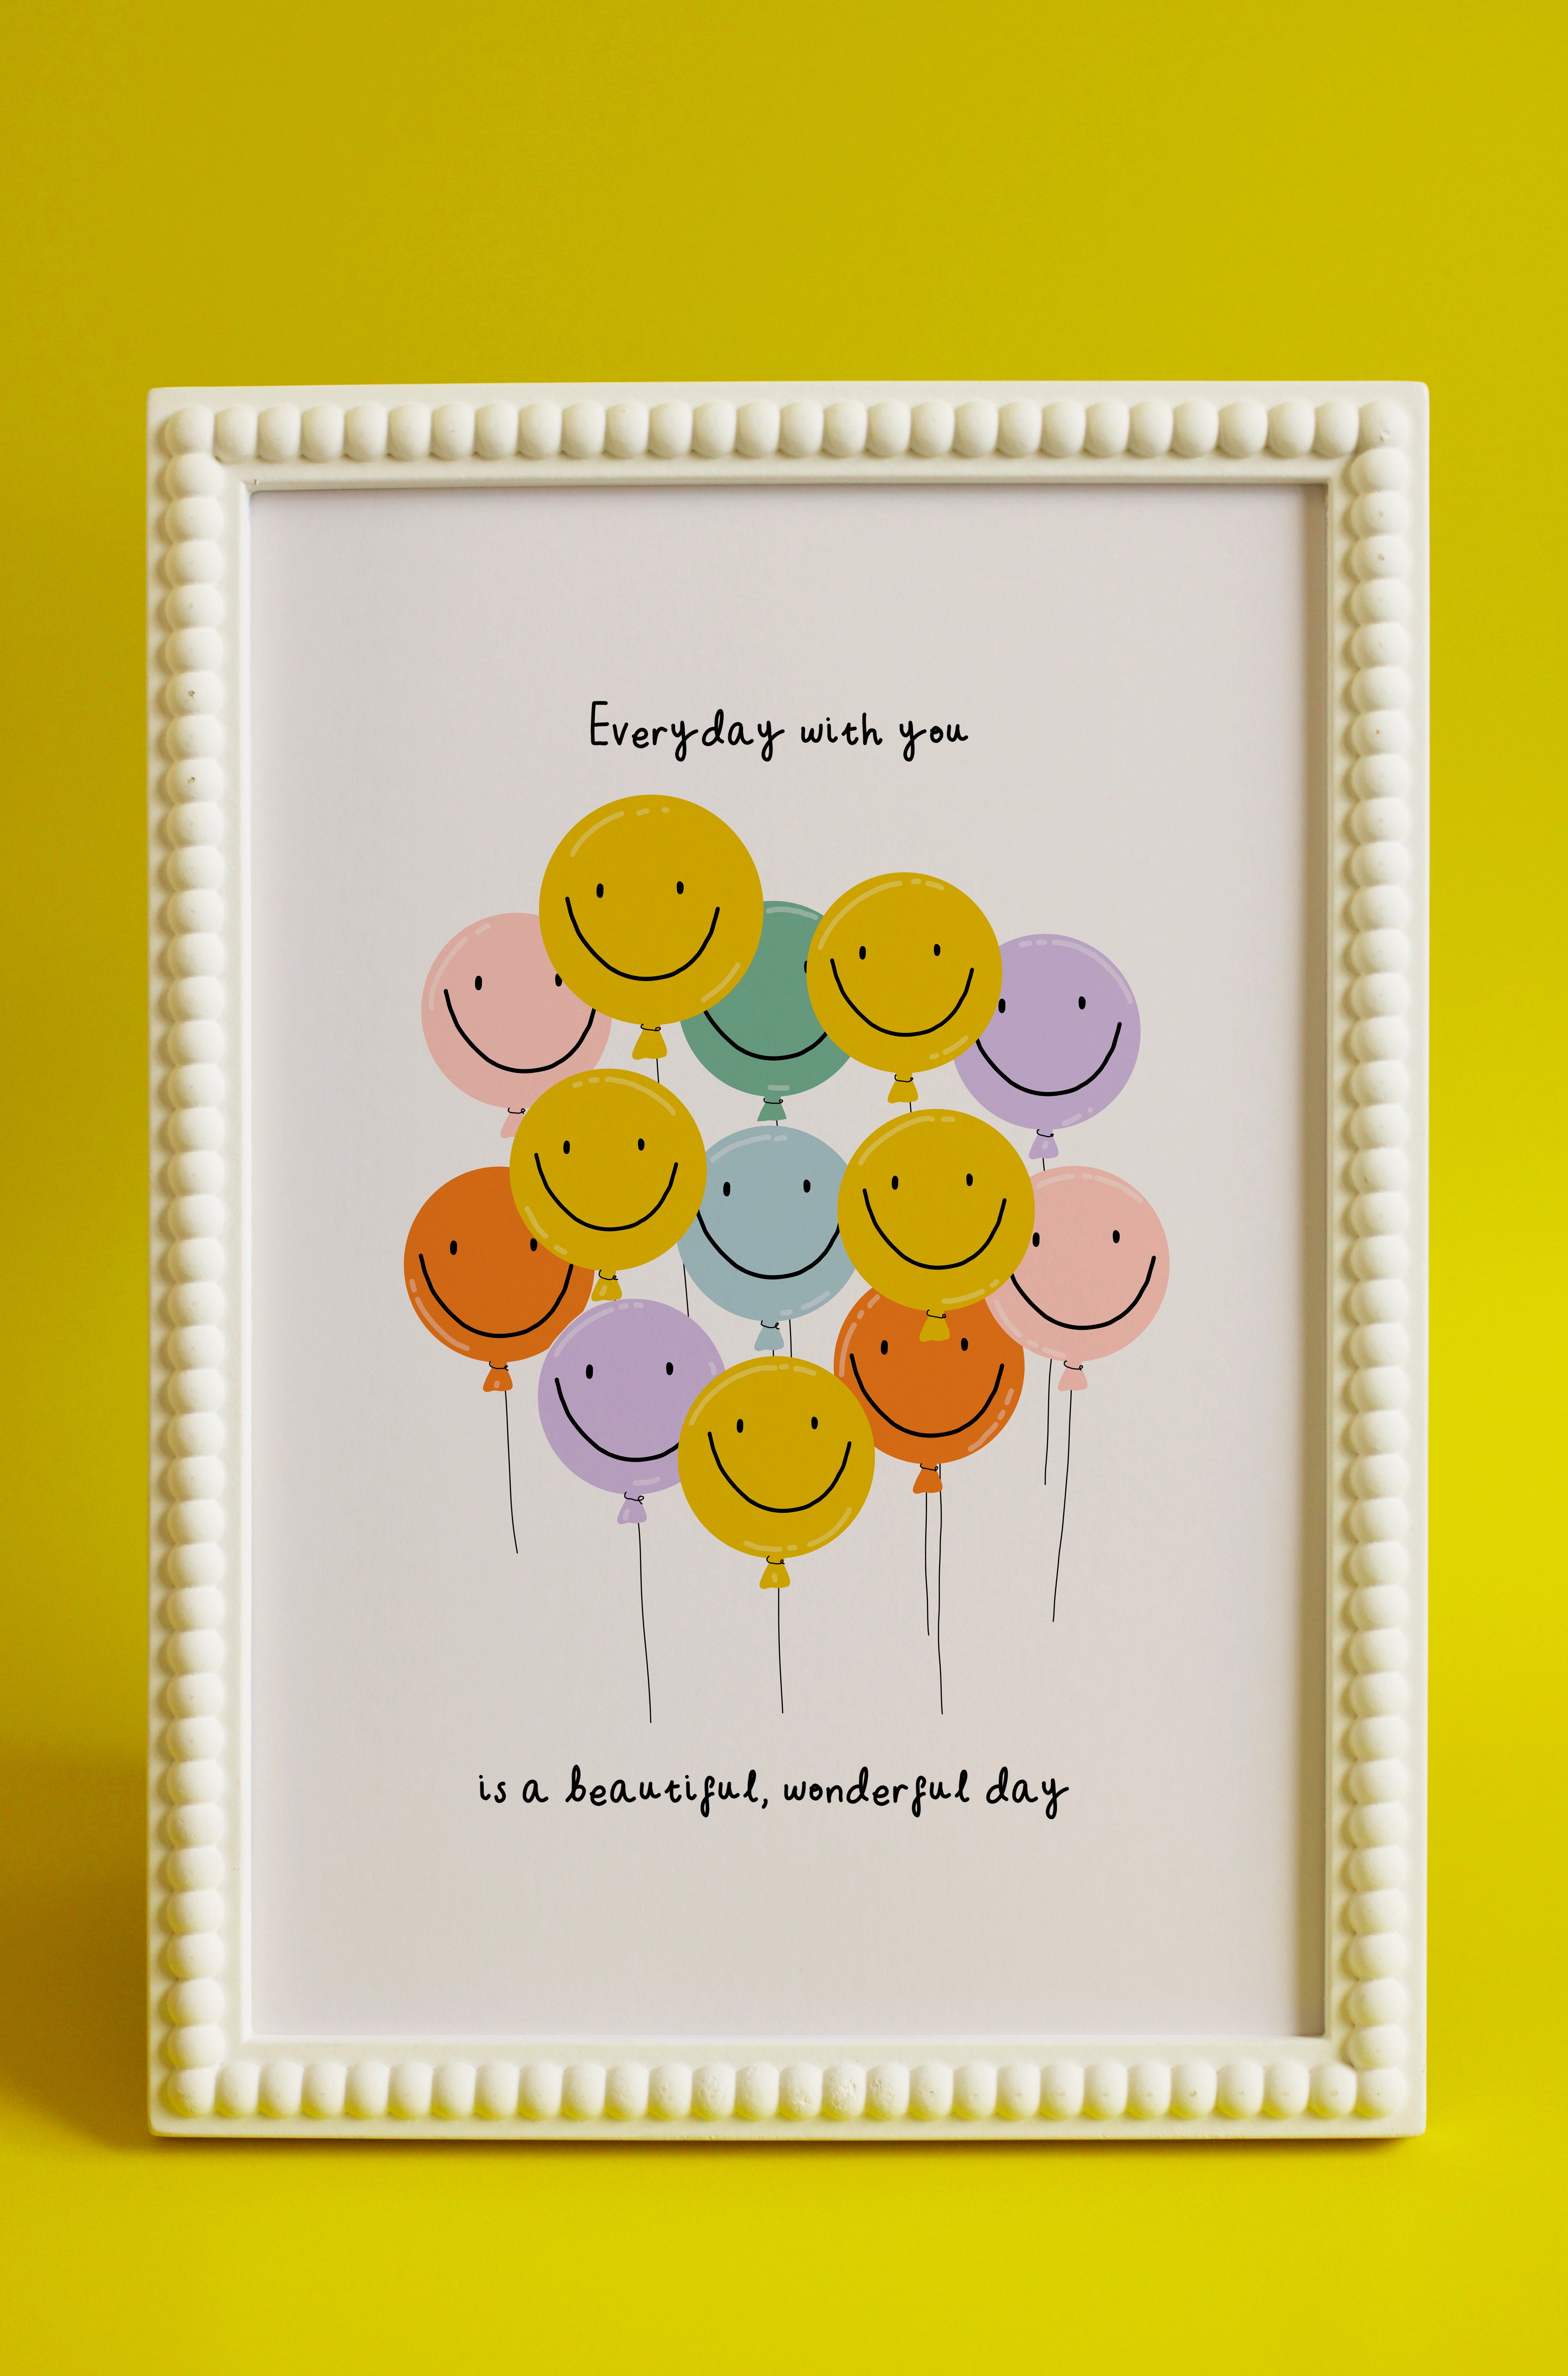 Everyday with you is a beautiful wonderful day balloon art print